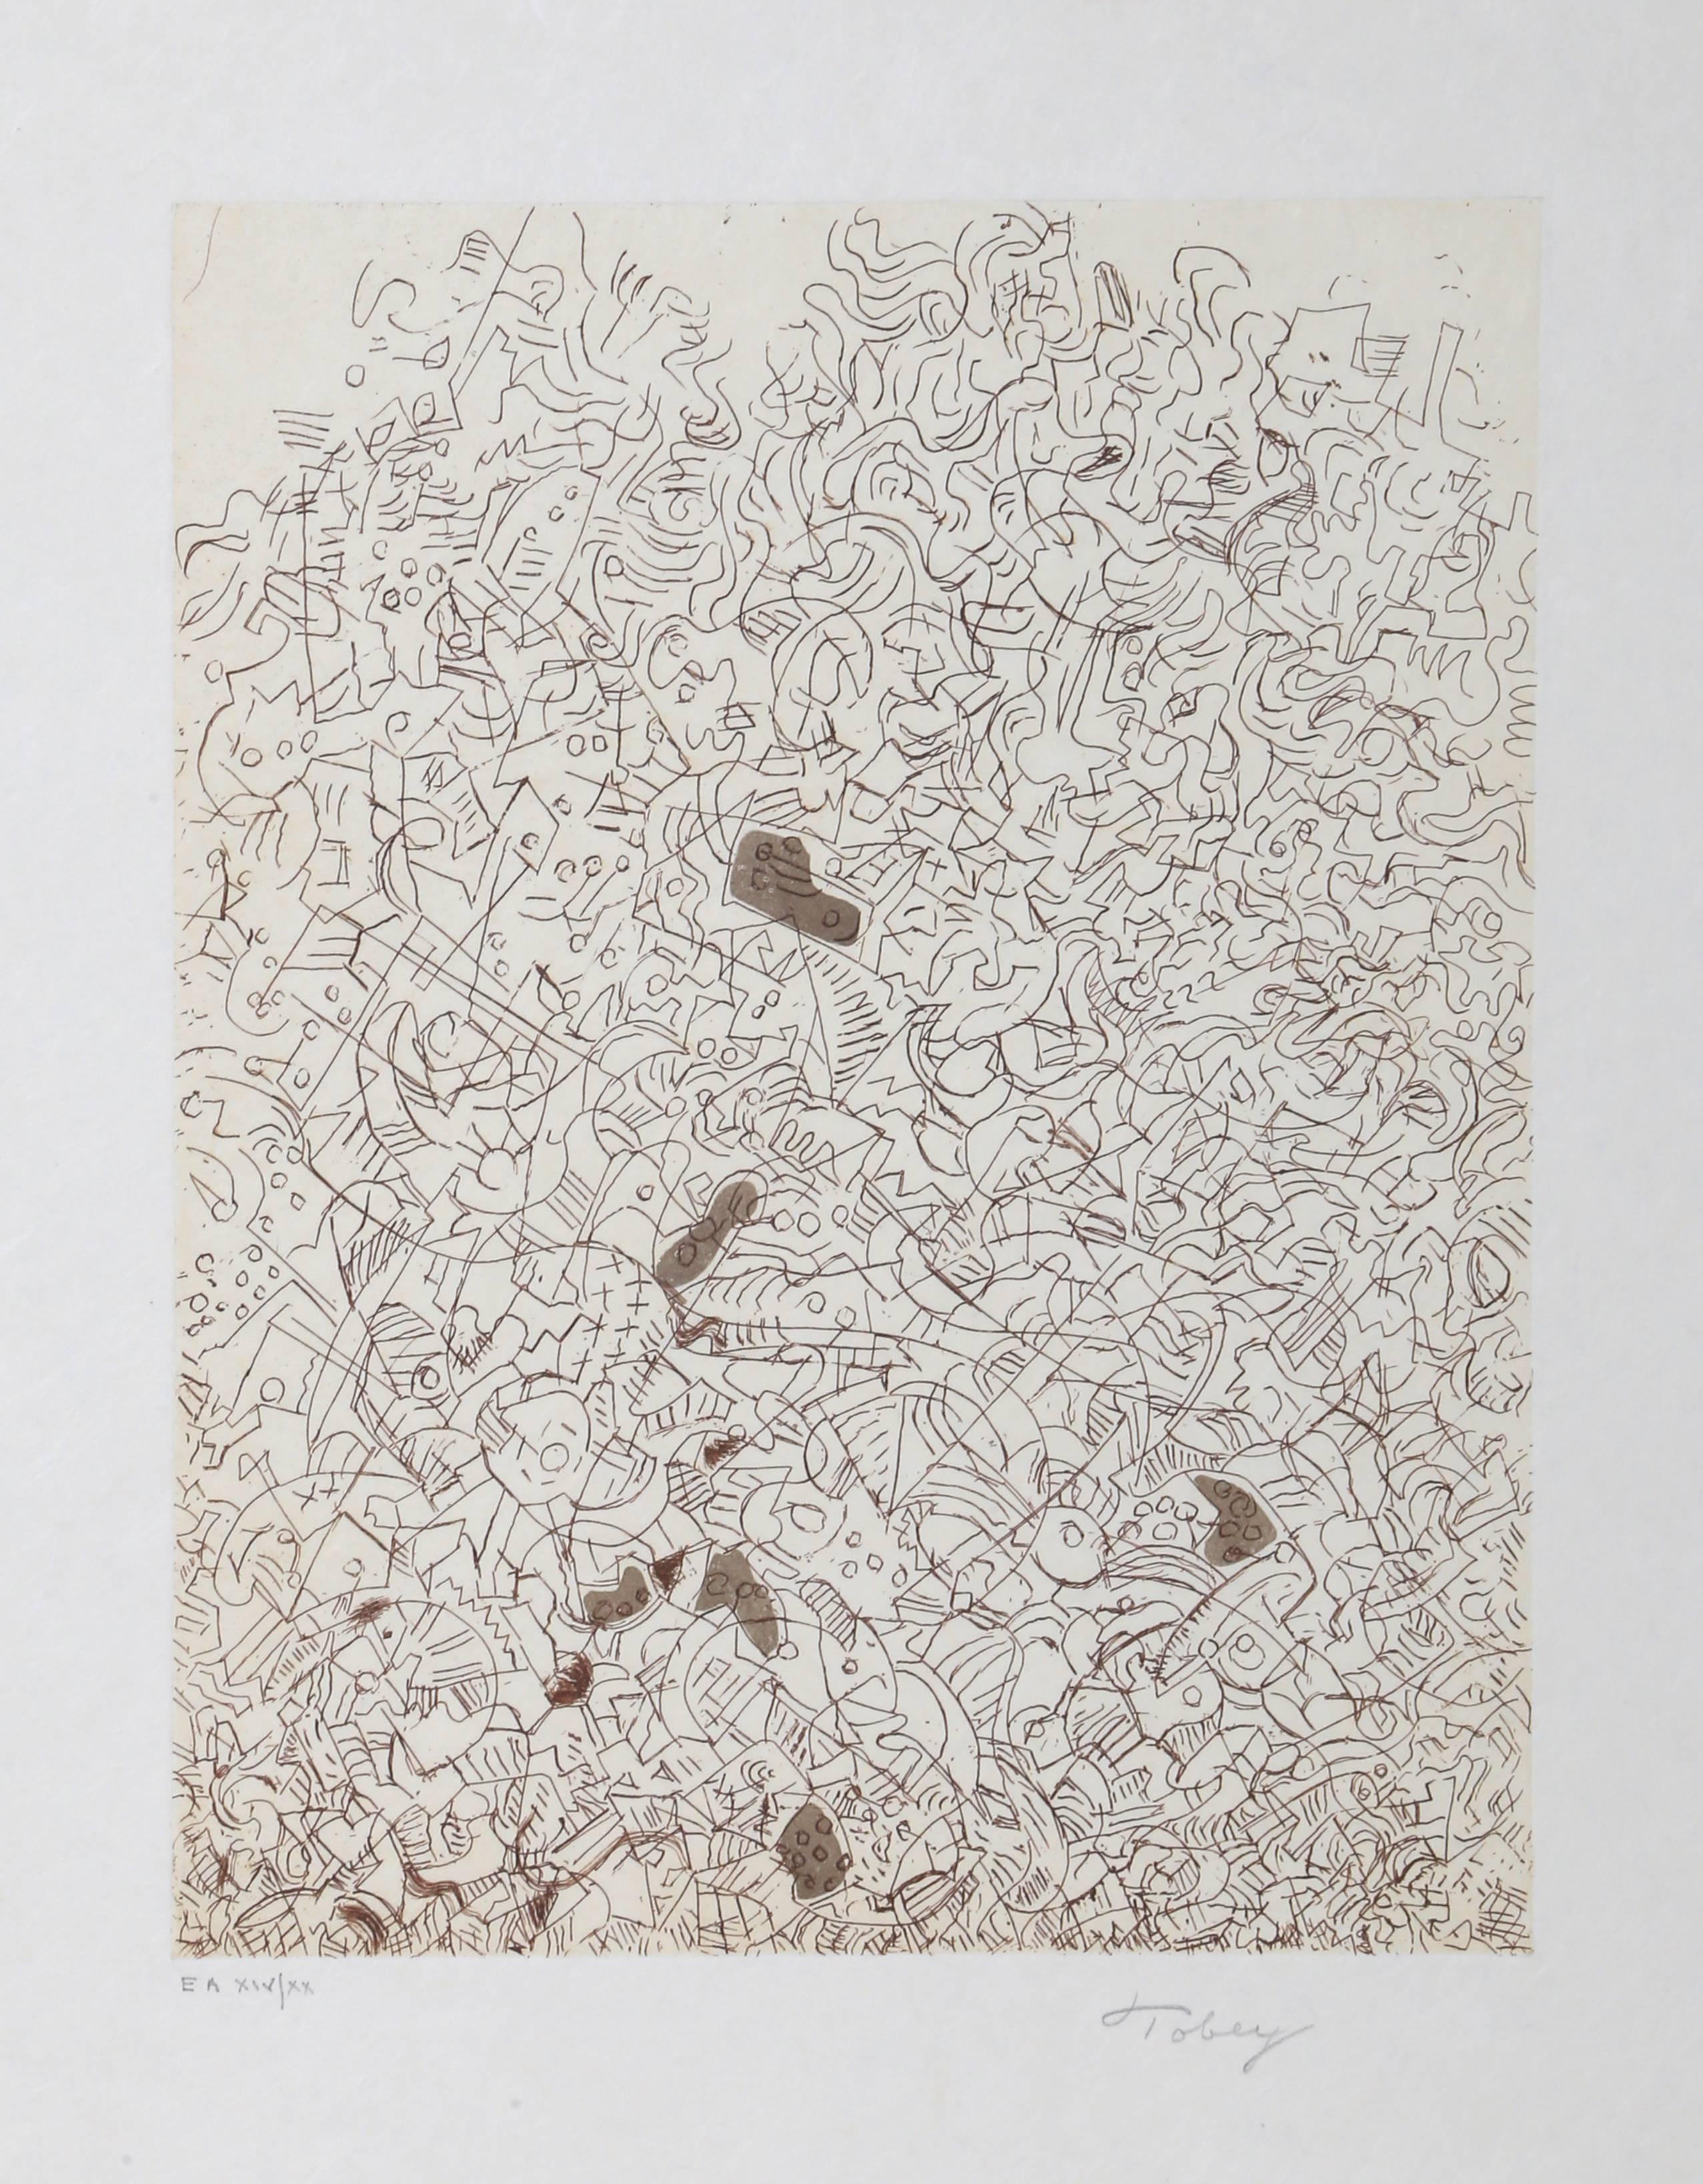 Artist: Mark Tobey, American (1890 - 1976)
Title: Psaltery, 2nd Form
Year: 1974
Medium: Etching on Japon, signed and numbered in pencil
Edition: L (50), EA XX
Paper Size: 26.5 x 20 in. ; Image: 14 x 11 inches

Printer: Atelier Rigal, Fontenay Aux